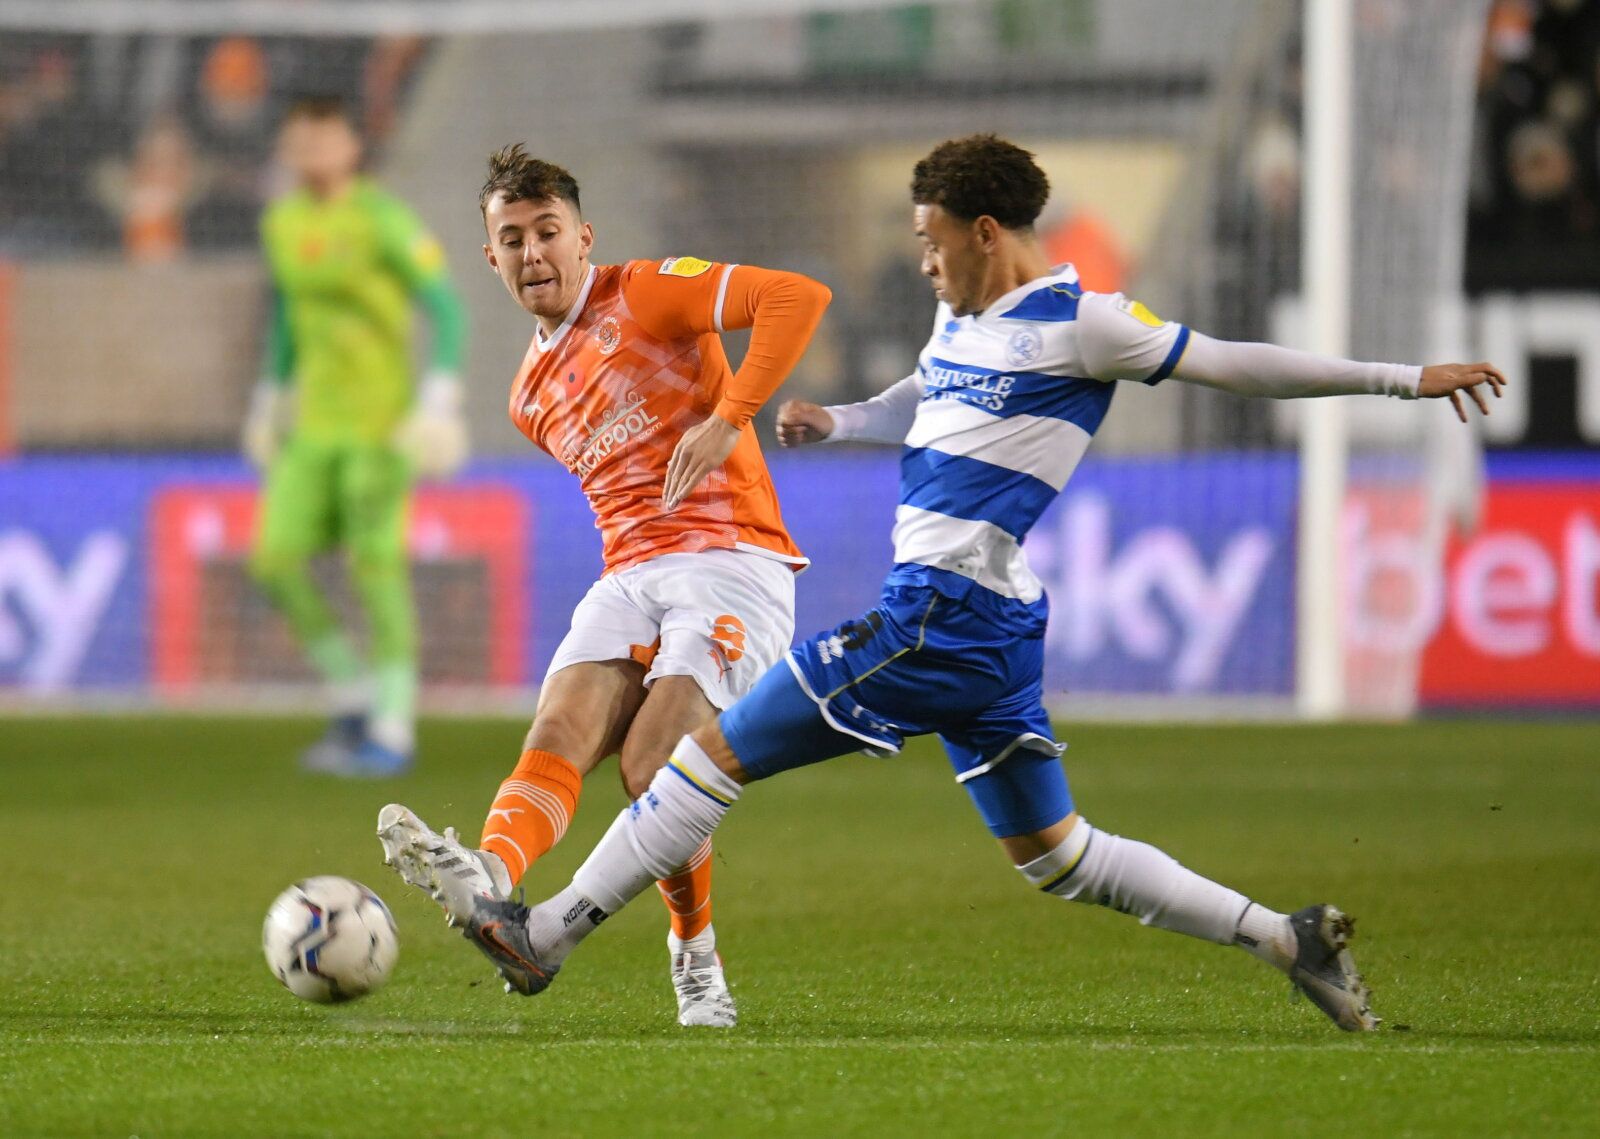 Soccer Football - Championship - Blackpool v Queens Park Rangers - Bloomfield Road, Blackpool, Britain - November 6, 2021 Blackpool's Ryan Wintle in action with QPR's Luke Amos  Action Images/Paul Burrows  EDITORIAL USE ONLY. No use with unauthorized audio, video, data, fixture lists, club/league logos or 